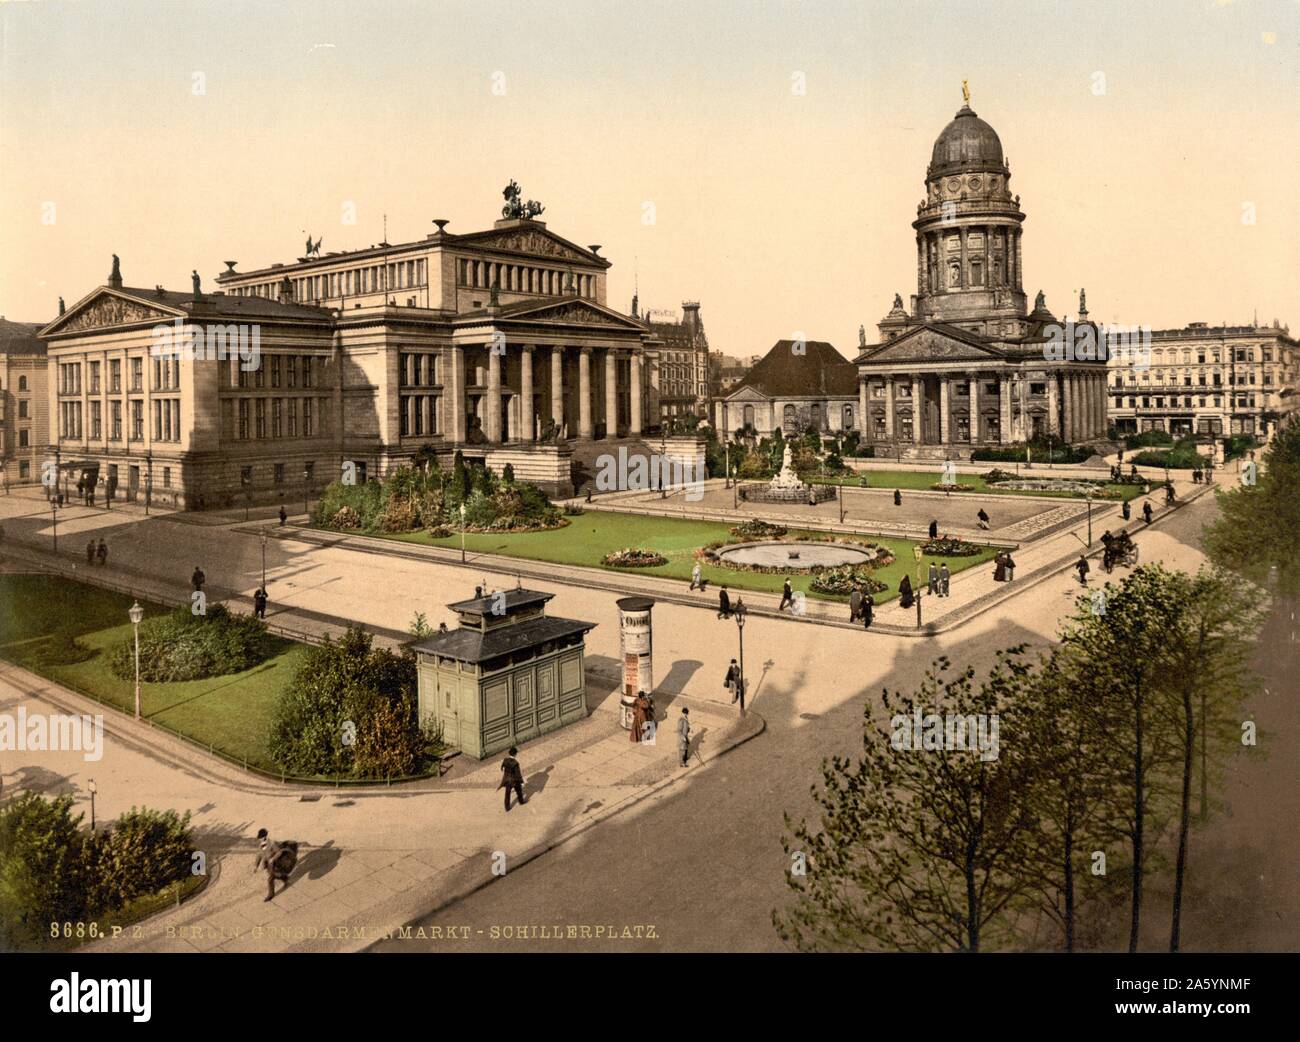 Schiller Square, Berlin, Germany. between 1890 and 1900. photomechanical print in photochrom, colour. Stock Photo